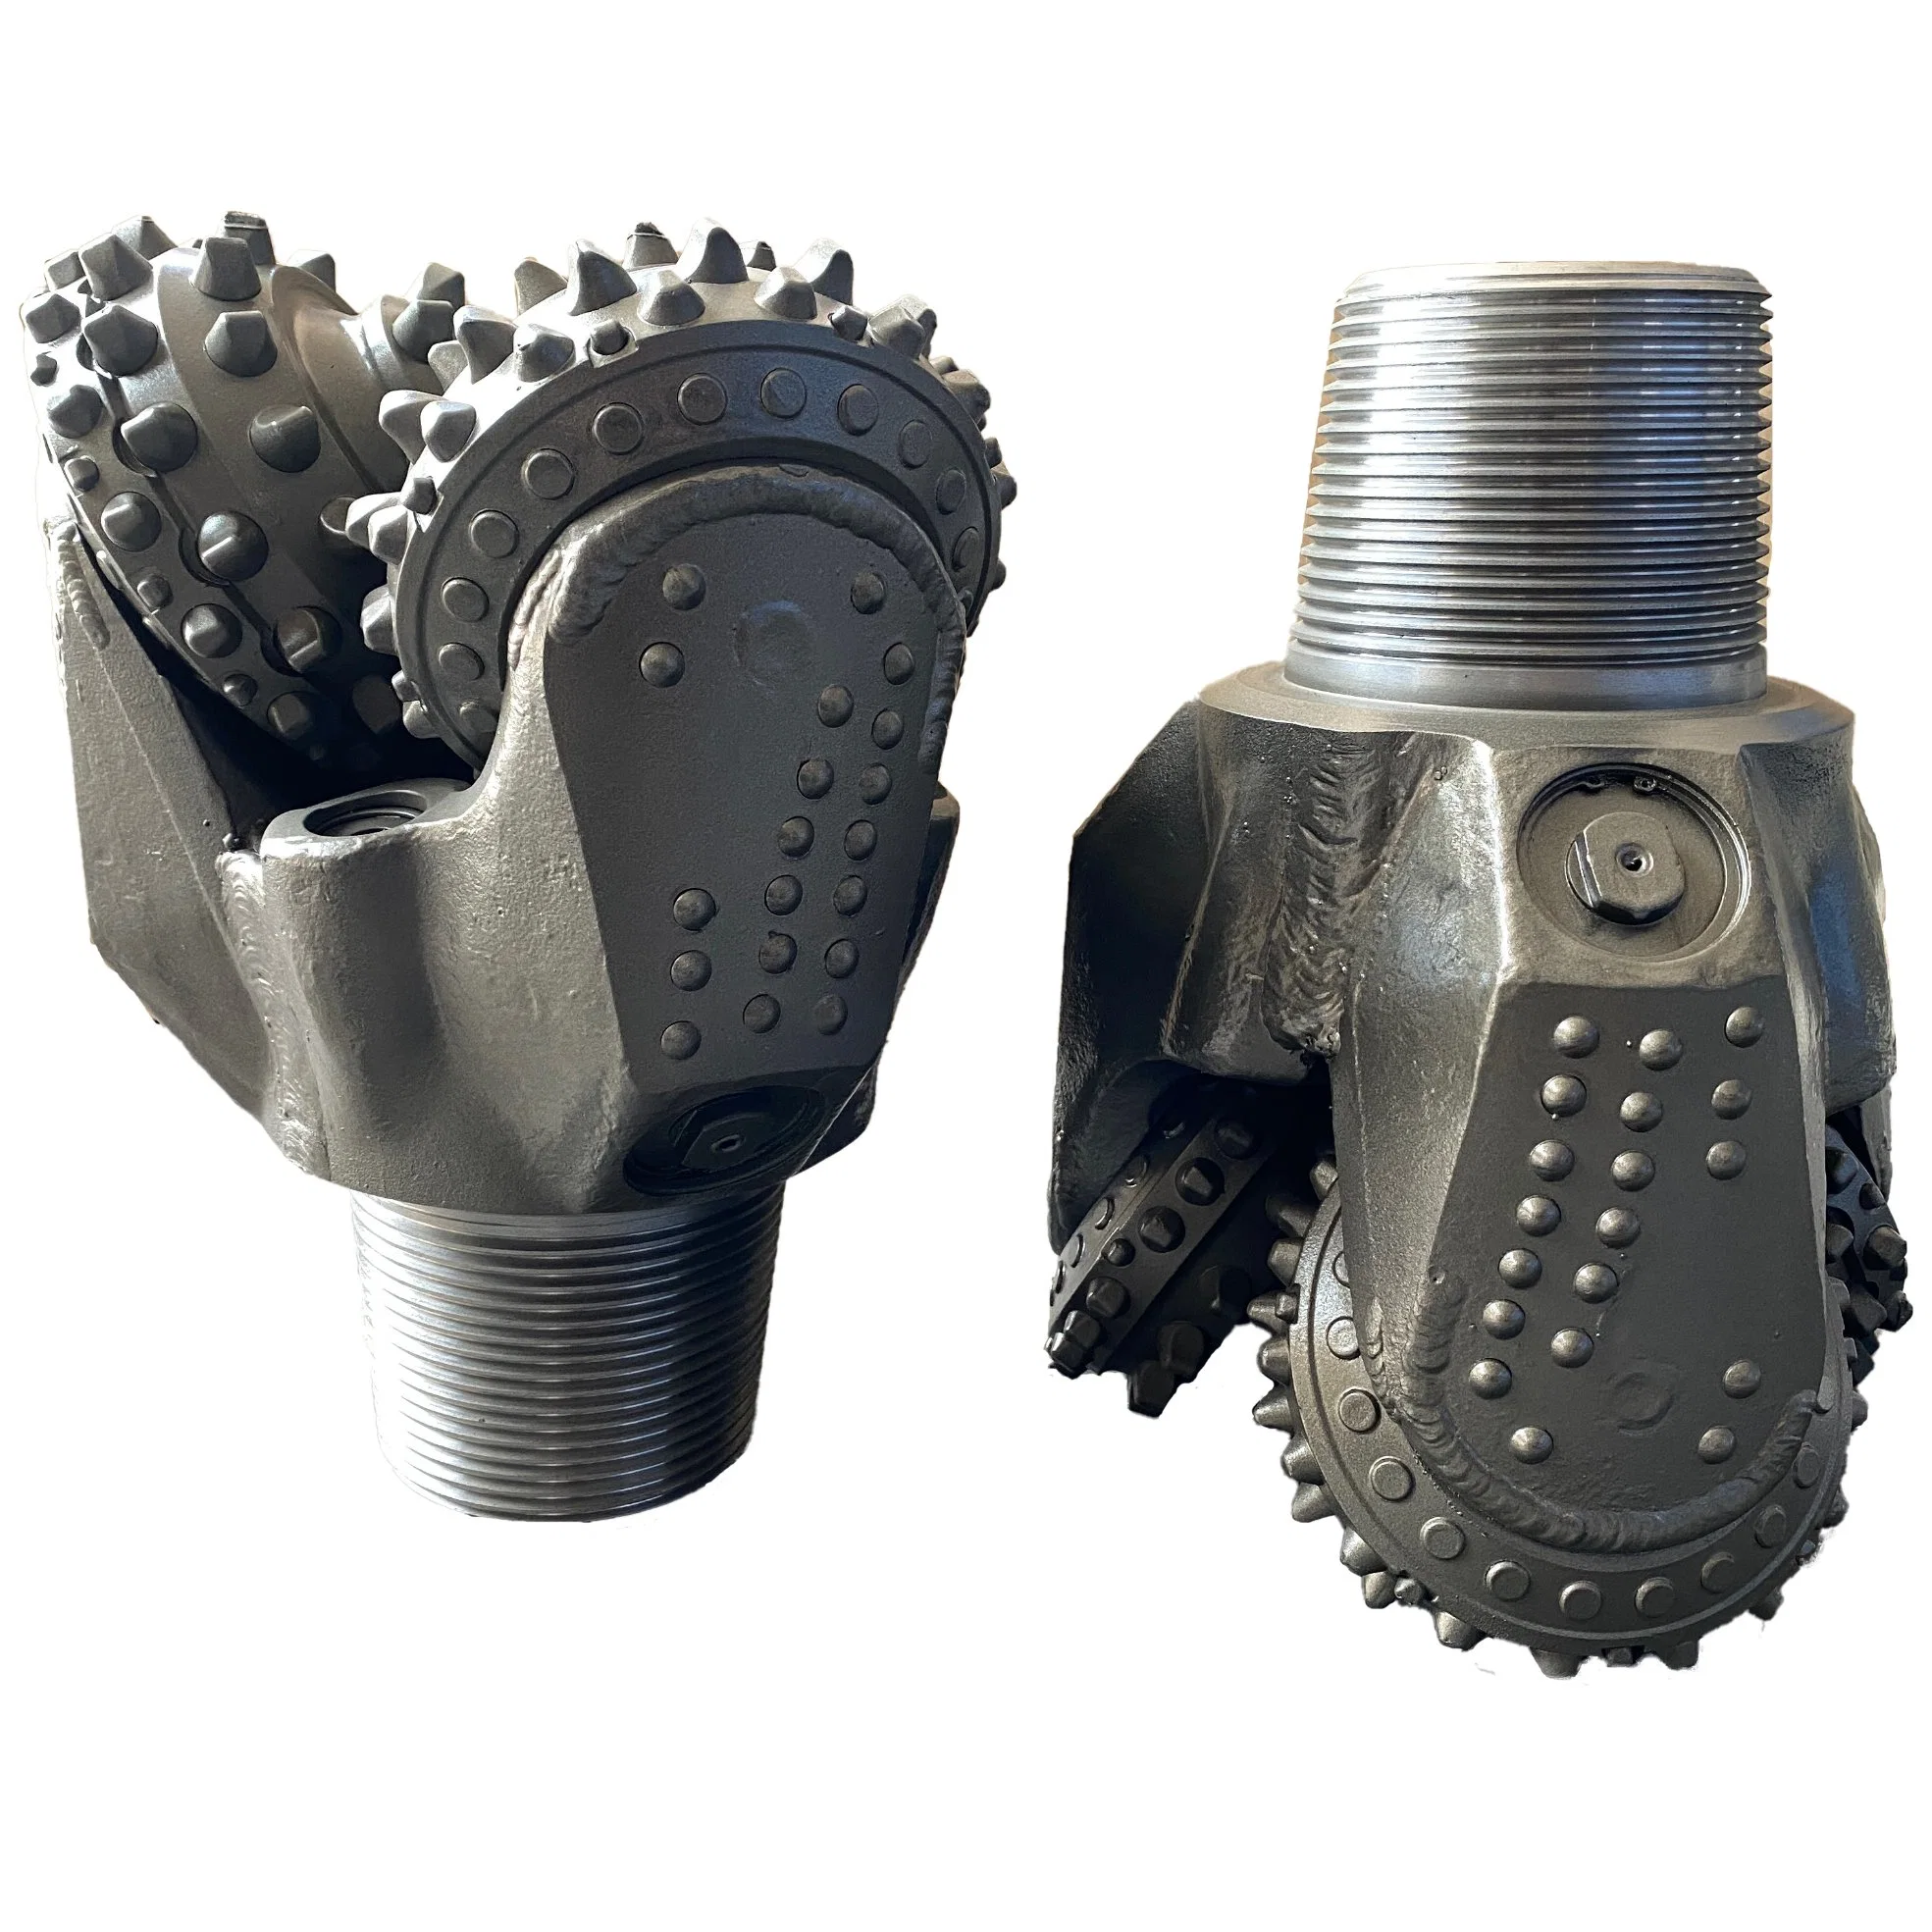 API Rock Drill Bits for Well Drilling/Mining, Tricone Bits, PDC Bits, Rock Reamers/Hole Openers, Drag Bits, Hammer Bits, Single Roller Cones/Cutters